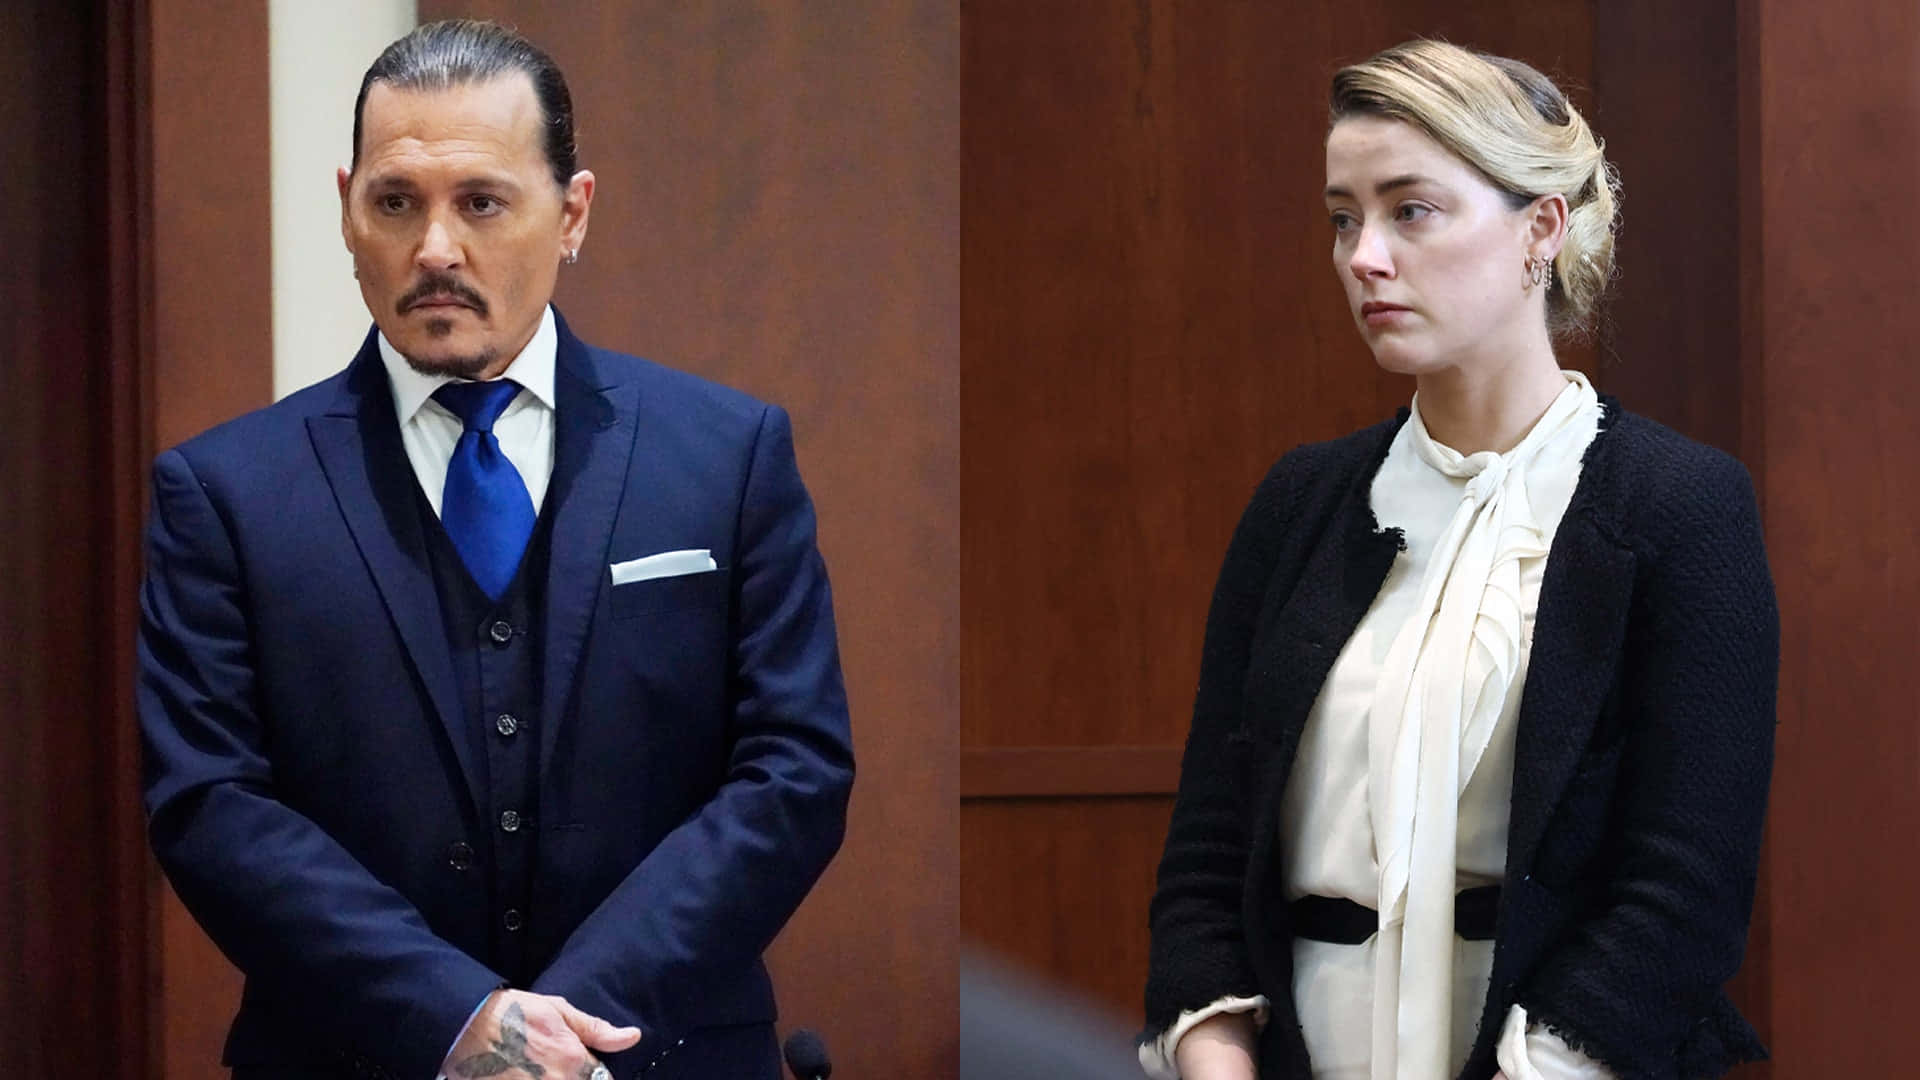 Johnnydepp Och Amber Heard Delar En Intim Stund. (as A Native Swedish Speaker, I Would Likely Translate This Sentence Directly Without Changing Any Wording, As It Accurately Conveys The Meaning In Swedish)